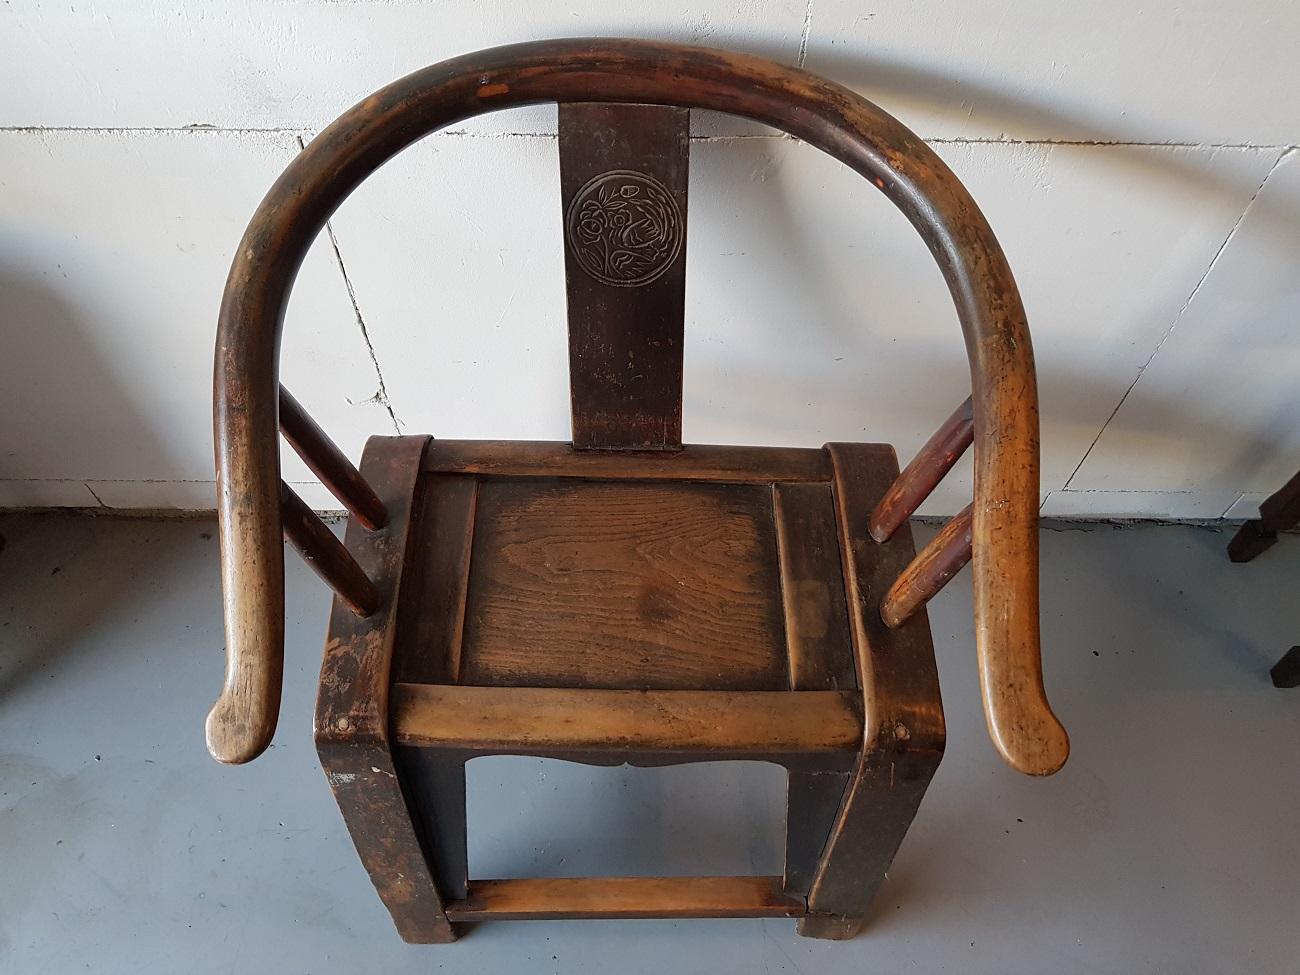 19th century Chinese horseshoe chair Quanyi from the Qing dynasty (several restorations).

The measurements are:
Depth 61 cm/ 24 inch.
Width 67 cm/ 26.3 inch.
Height 88 cm/ 34.6 inch.
Seat height 51 cm/ 20 inch.
 